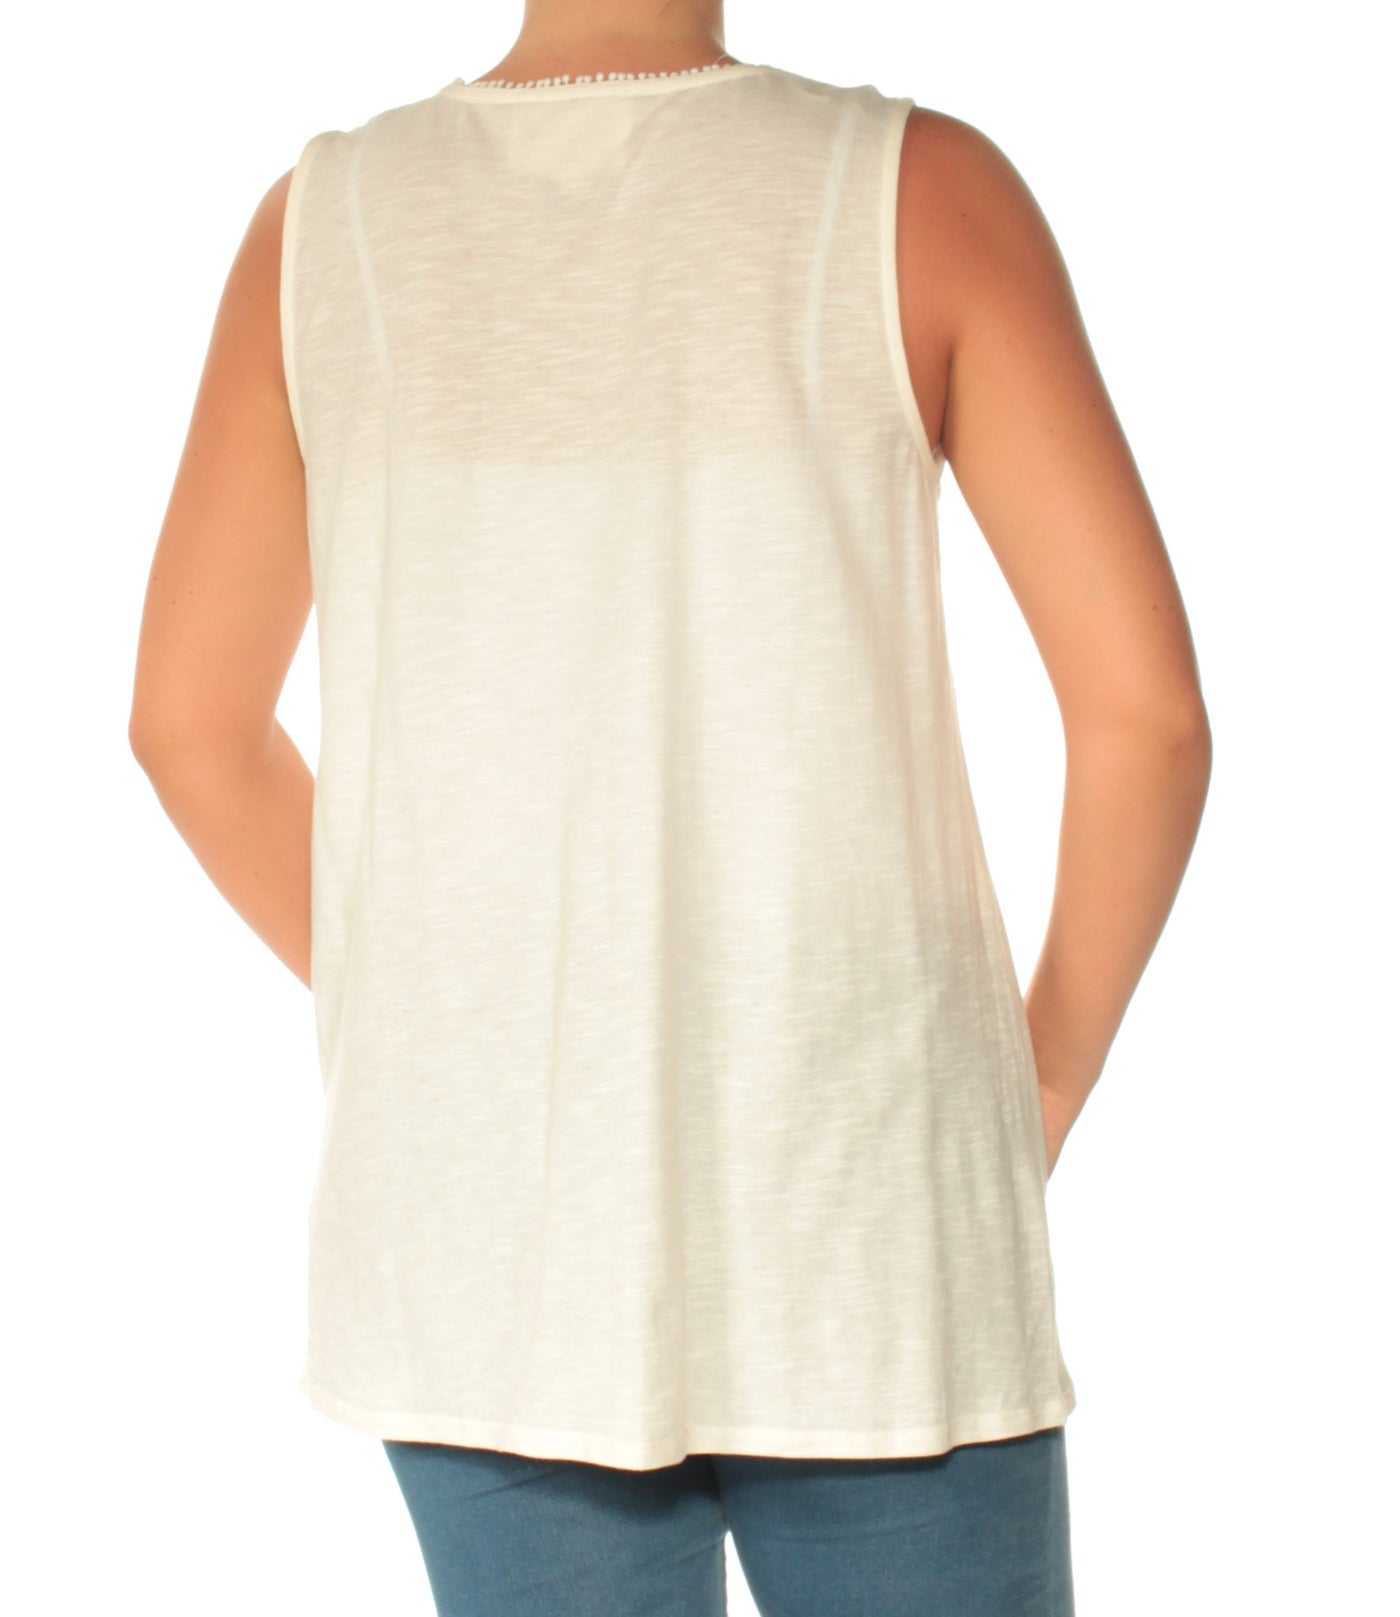 VINCE CAMUTO Womens Ivory Lace Sleeveless V Neck Top